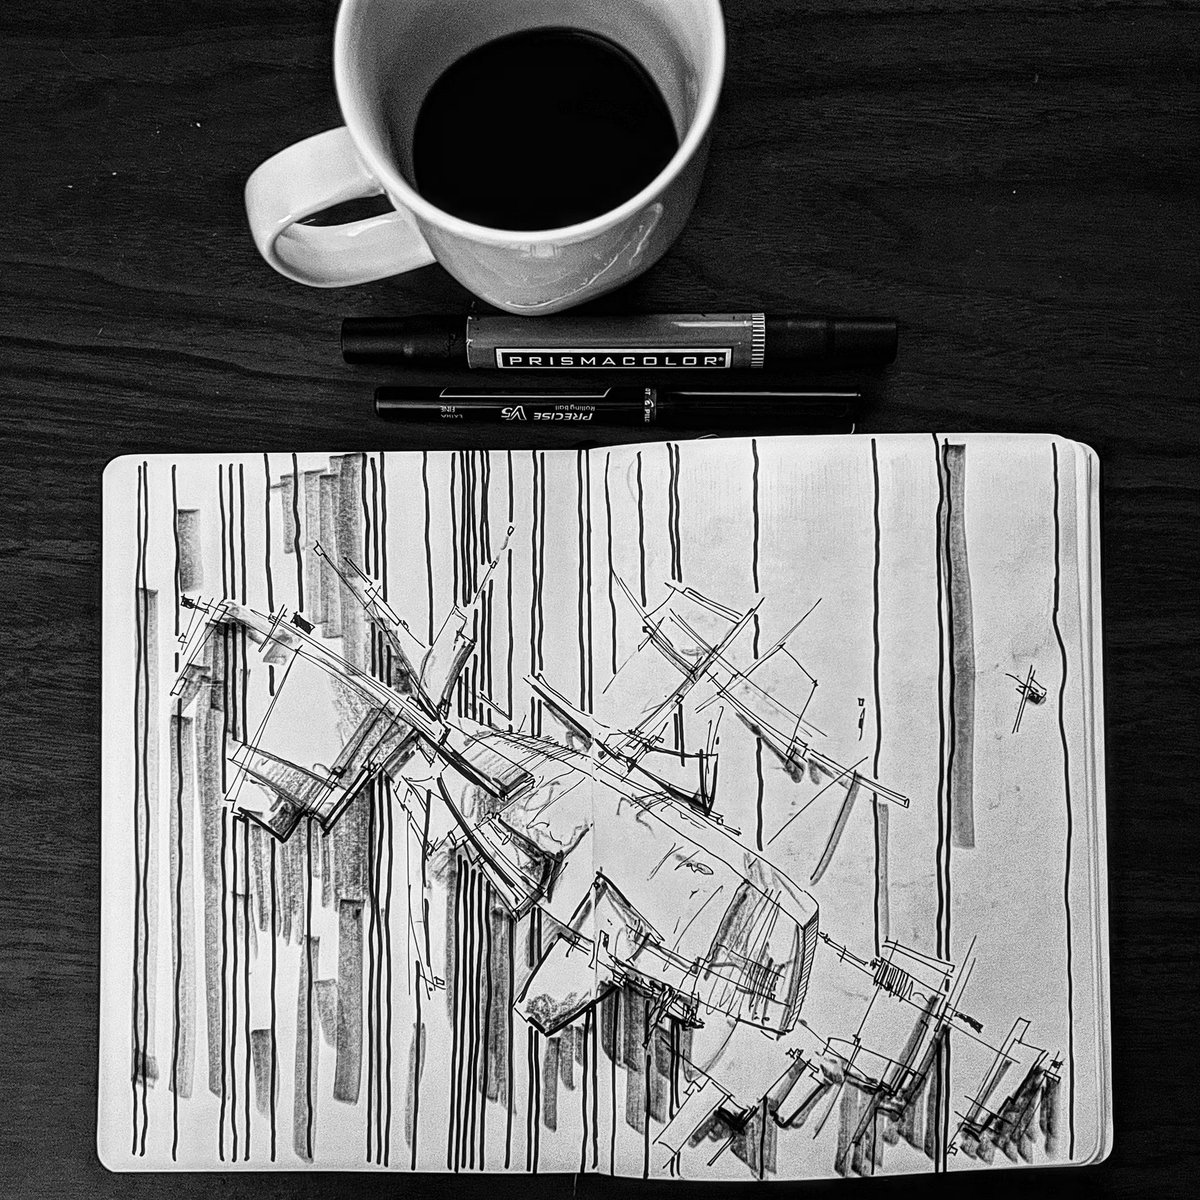 Take a listen #coffeesketch Ep 108 - 
“Horizontal and Vertical Citymaking' or ‘tilting at windmills of composition’ includes a walkabout in downtown Austin for a peek @snohetta’s welcome new work @BlantonMuseum | #art #architecture #podcast #austin #flint buzzsprout.com/272902/1217713…